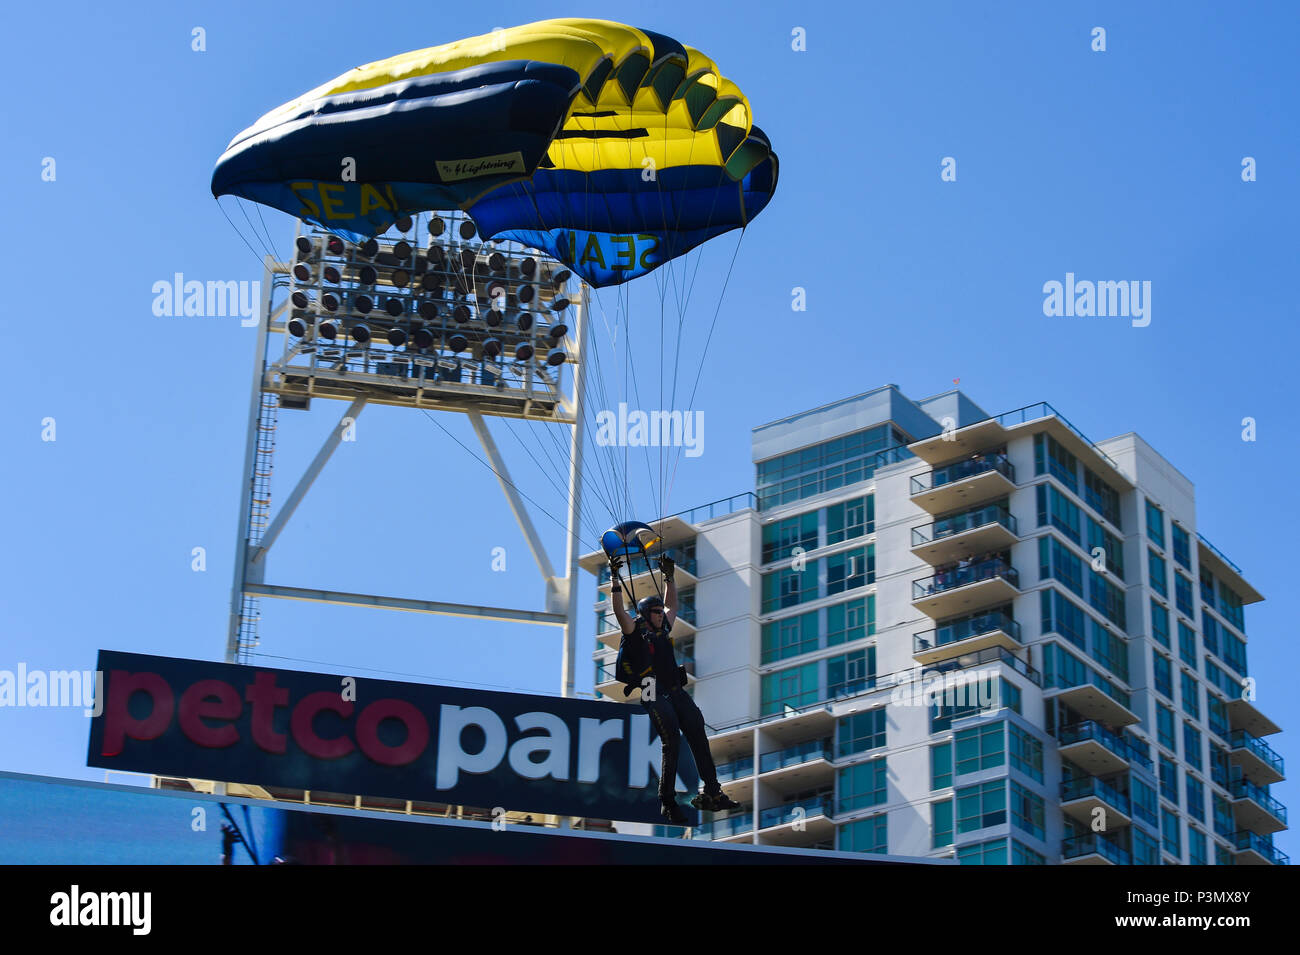 160710-N-VY375-017 SAN DIEGO (July 10, 2016) – Lt. (SEAL) Duncan Hamilton, member of the U.S. Navy Parachute Team, the Leap Frogs, comes in for a landing during a demonstration at the Major League Baseball All-Star Futures Game above Petco Park. The Navy Parachute Team is based in San Diego and performs aerial parachute demonstrations around the nation in support of Naval Special Warfare and Navy recruiting. (U.S. Navy photo by Special Operator 1st Class Remington Peters/Released) Stock Photo